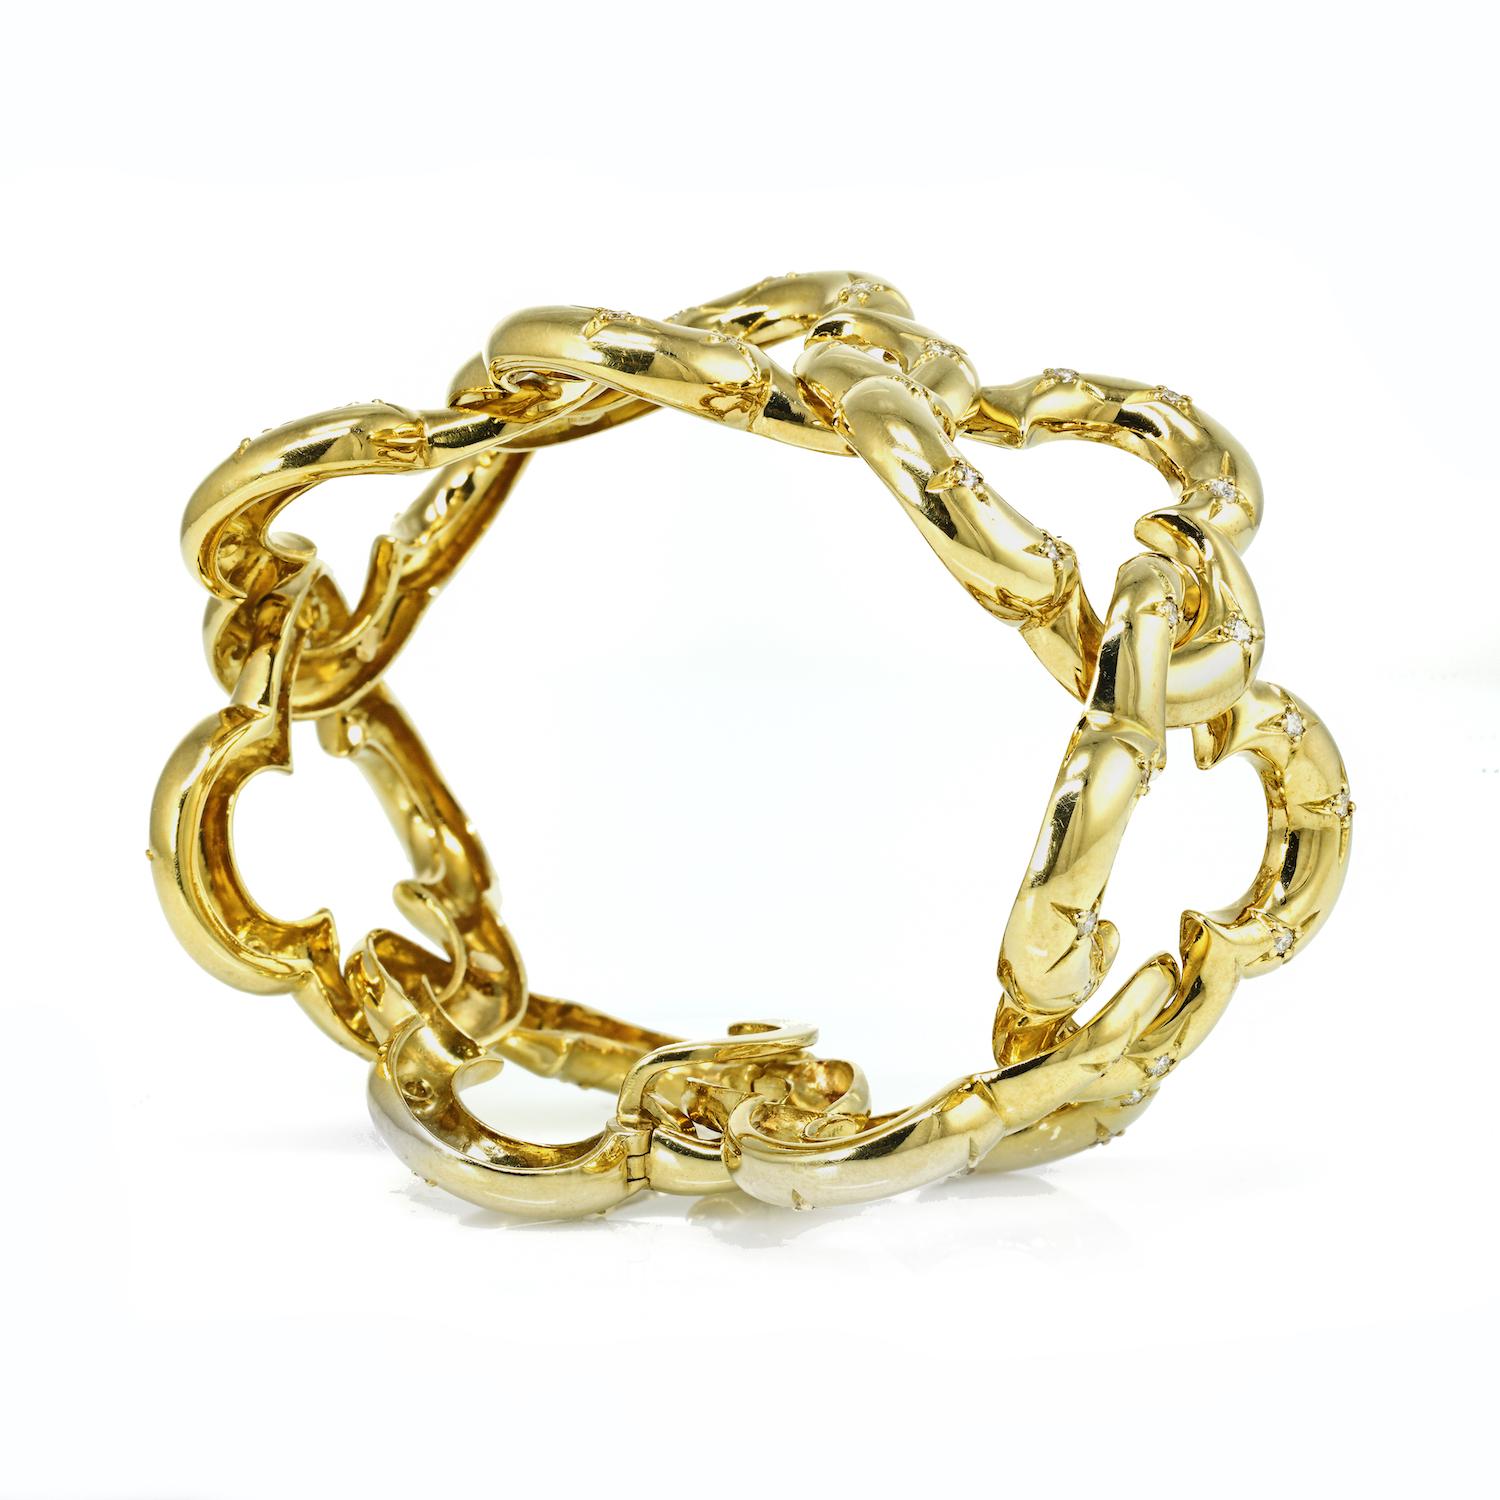 Rare in scale, this vintage Van Cleef & Arpels 18k gold open link Alhambra diamond bracelet is the ultimate statement item in your jewelry box. Consisting of 7 large interlocking quatrefoil links measuring approximately one inch long, the bracelet